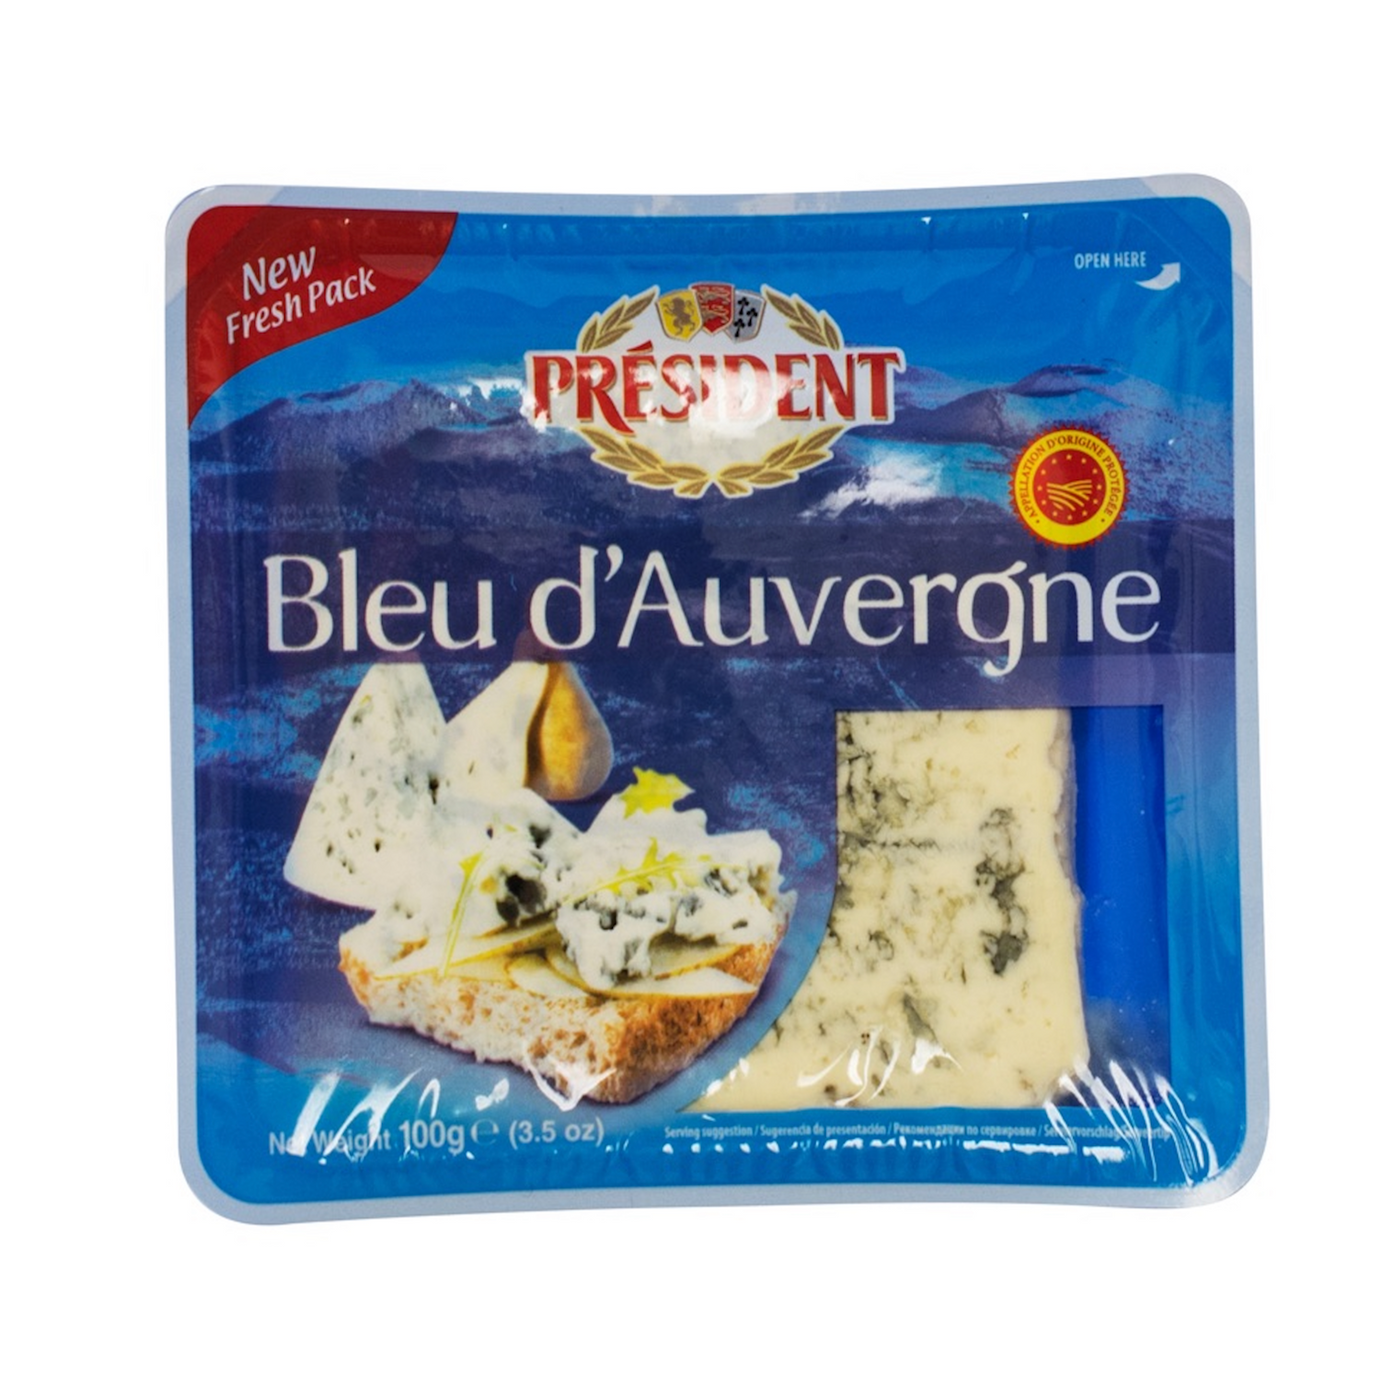 Shop Bleu d'Auvergne in Singapore - The New Grocer